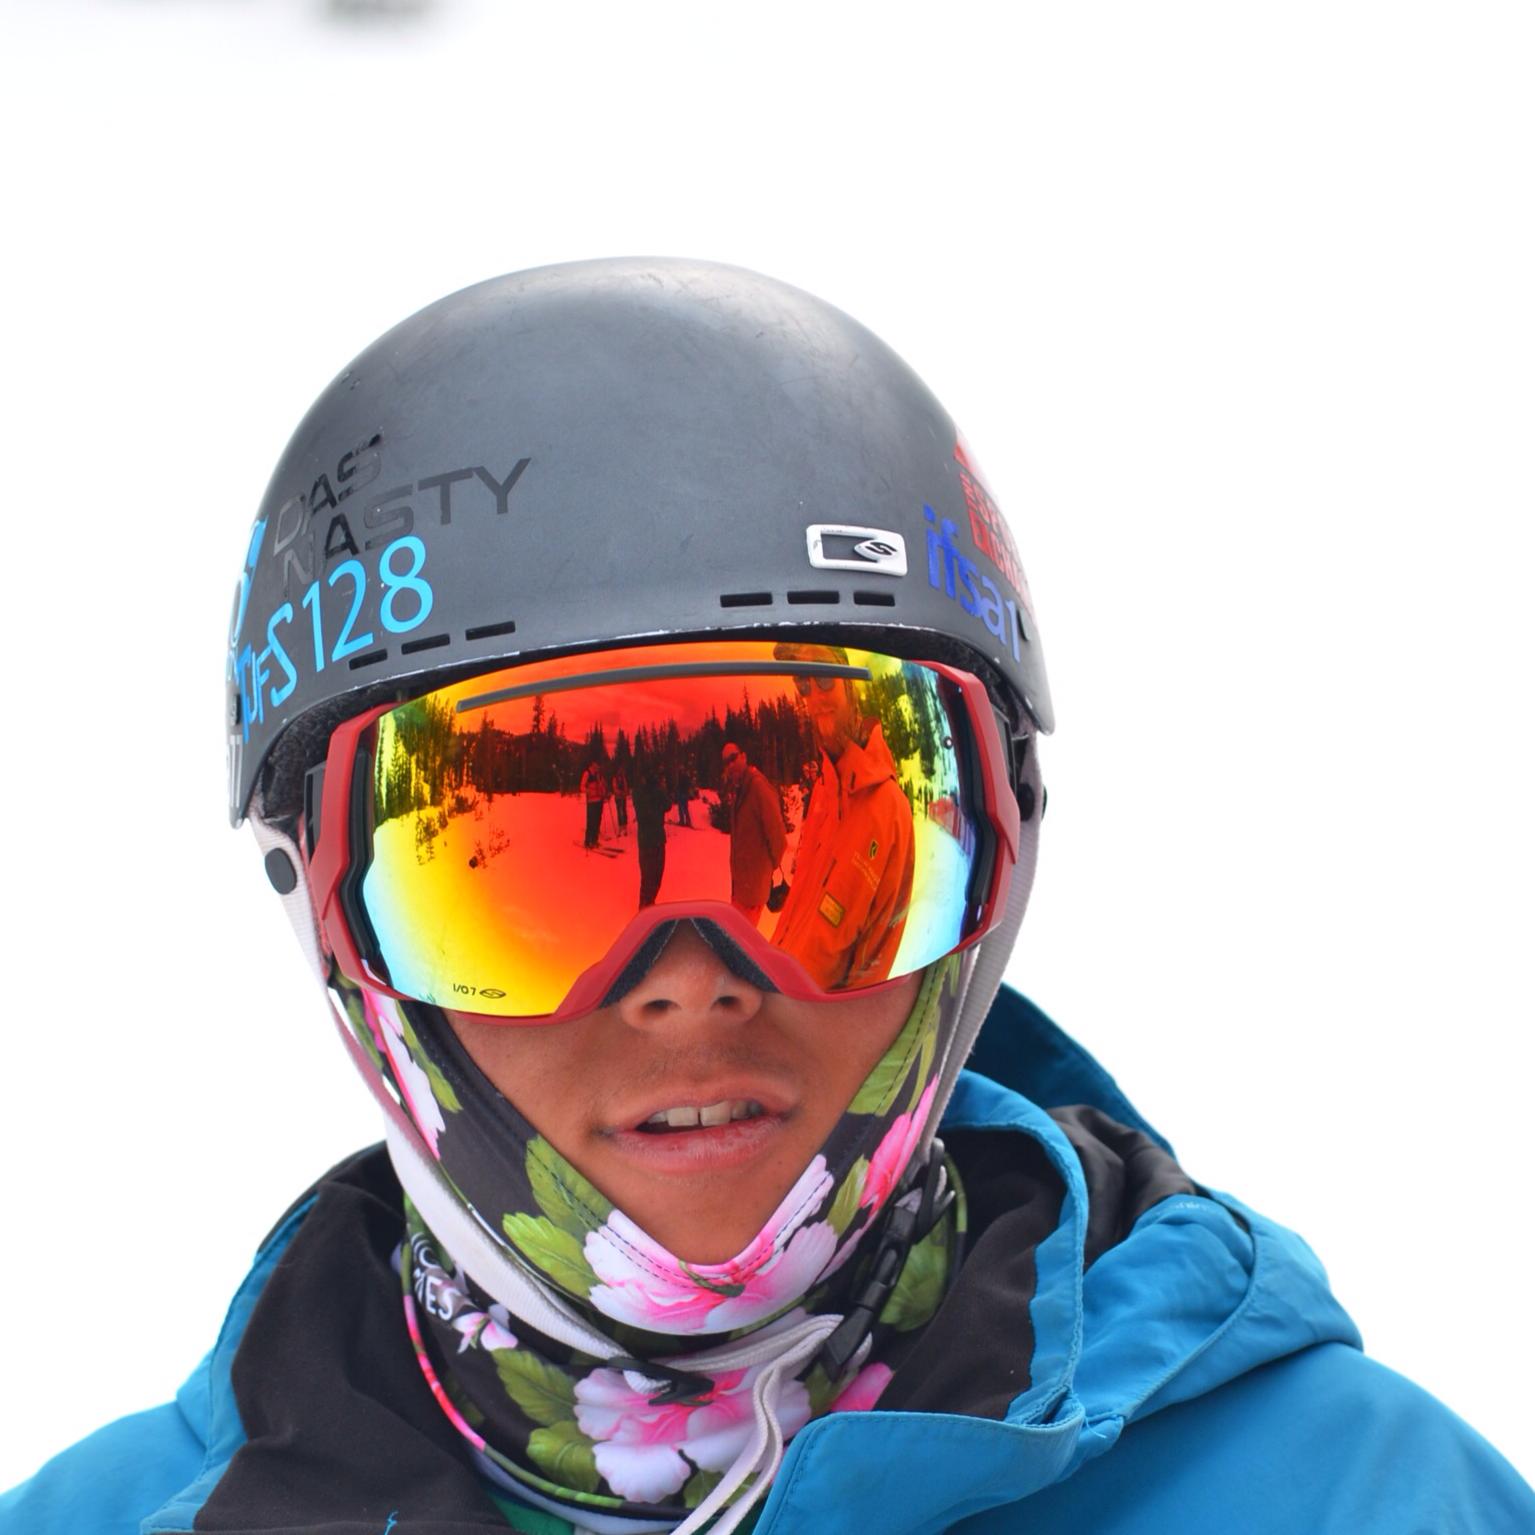 Jackson raised money this year while competing in the International Free Skiing Association’s Junior Freeride Tour